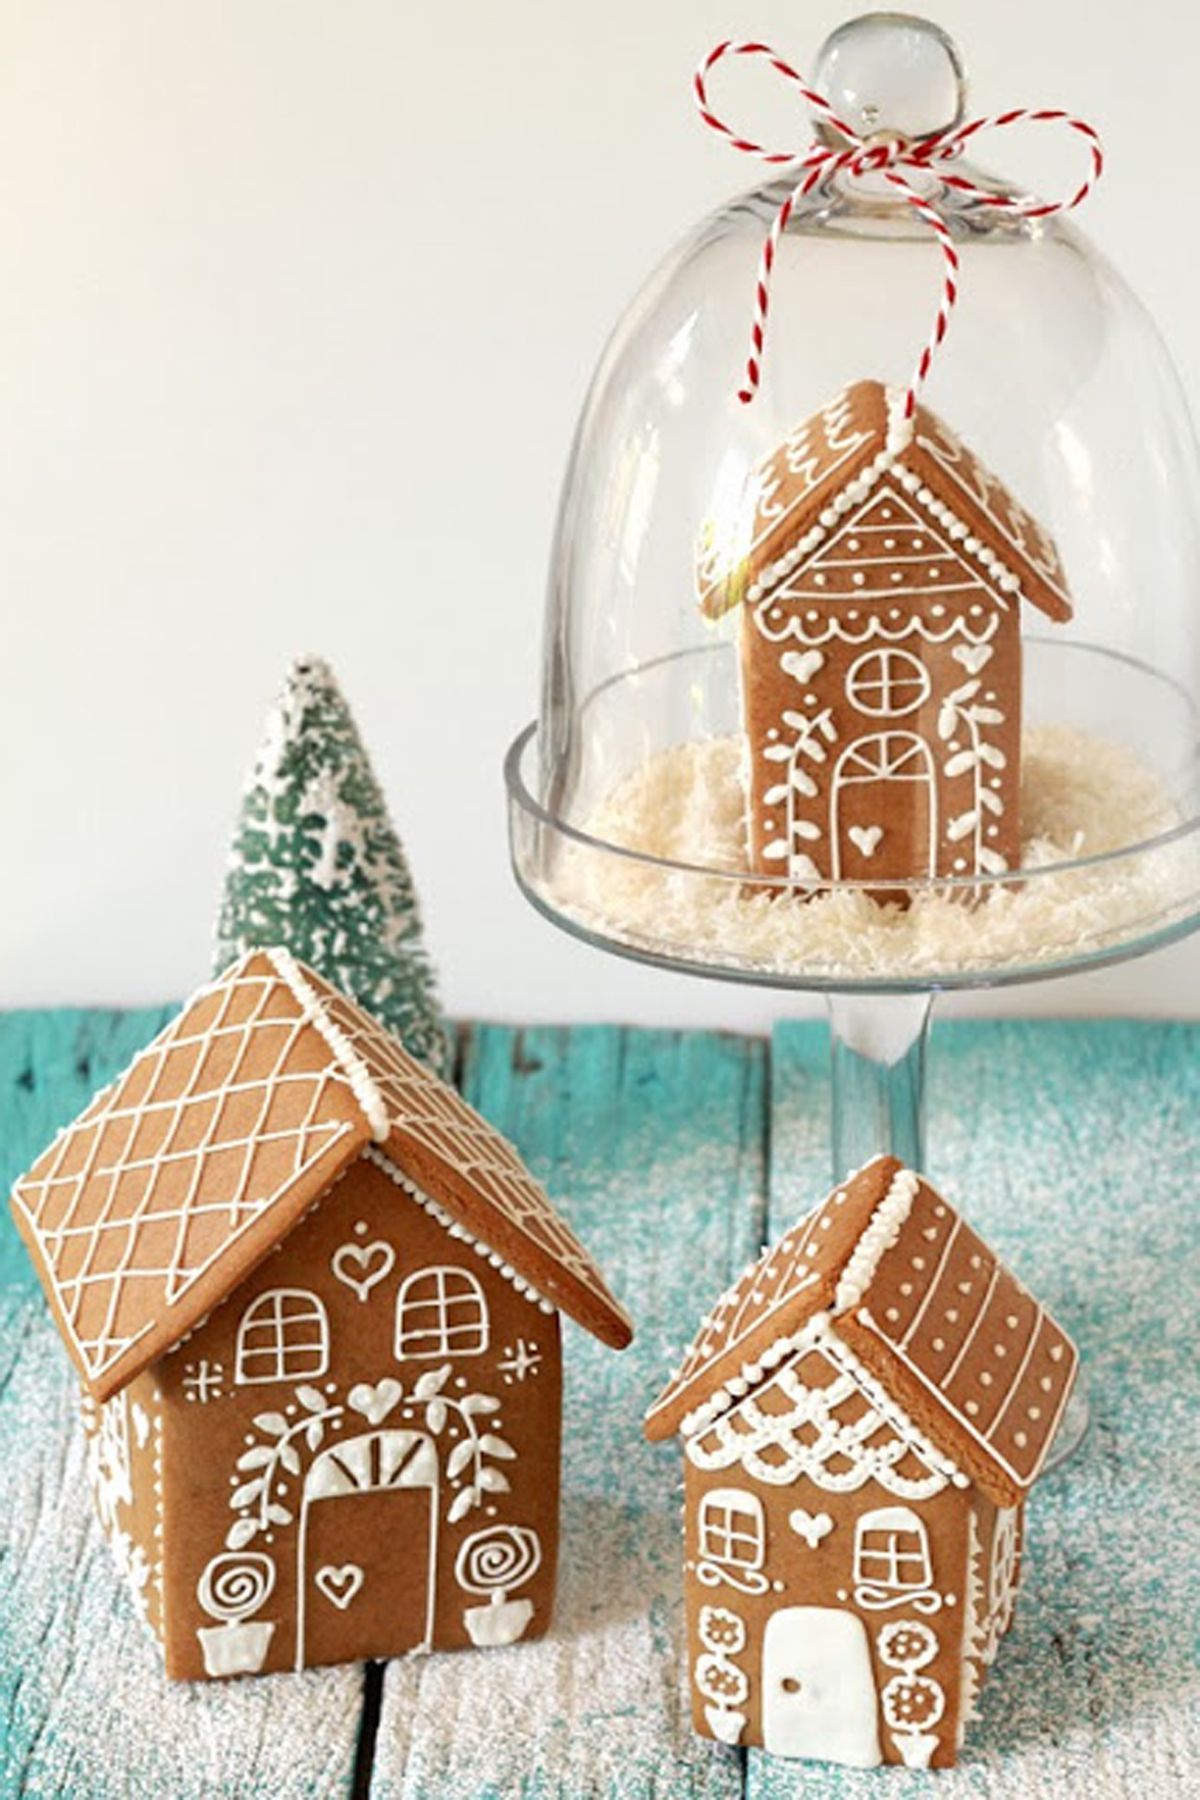 Snow Globe Gingerbread Houses -   Cristmass Gingerbread and Pretzel Houses Ideas